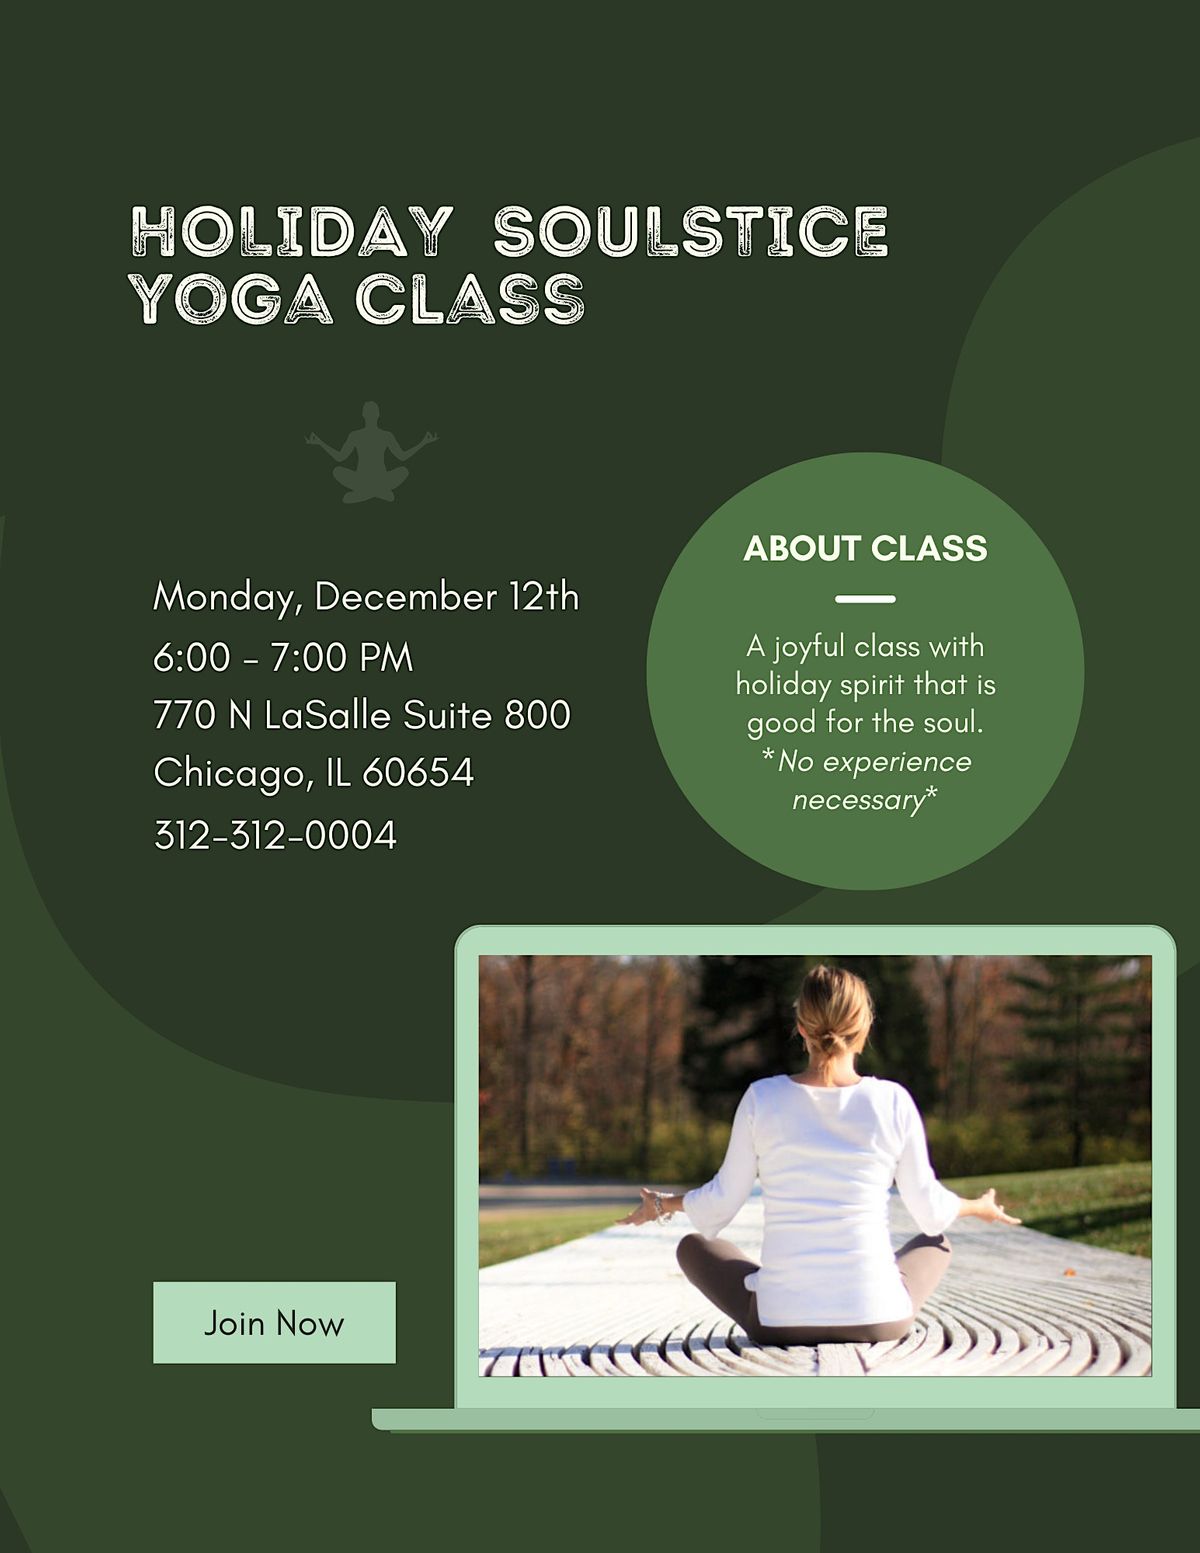 Holiday Soulstice Yoga Class